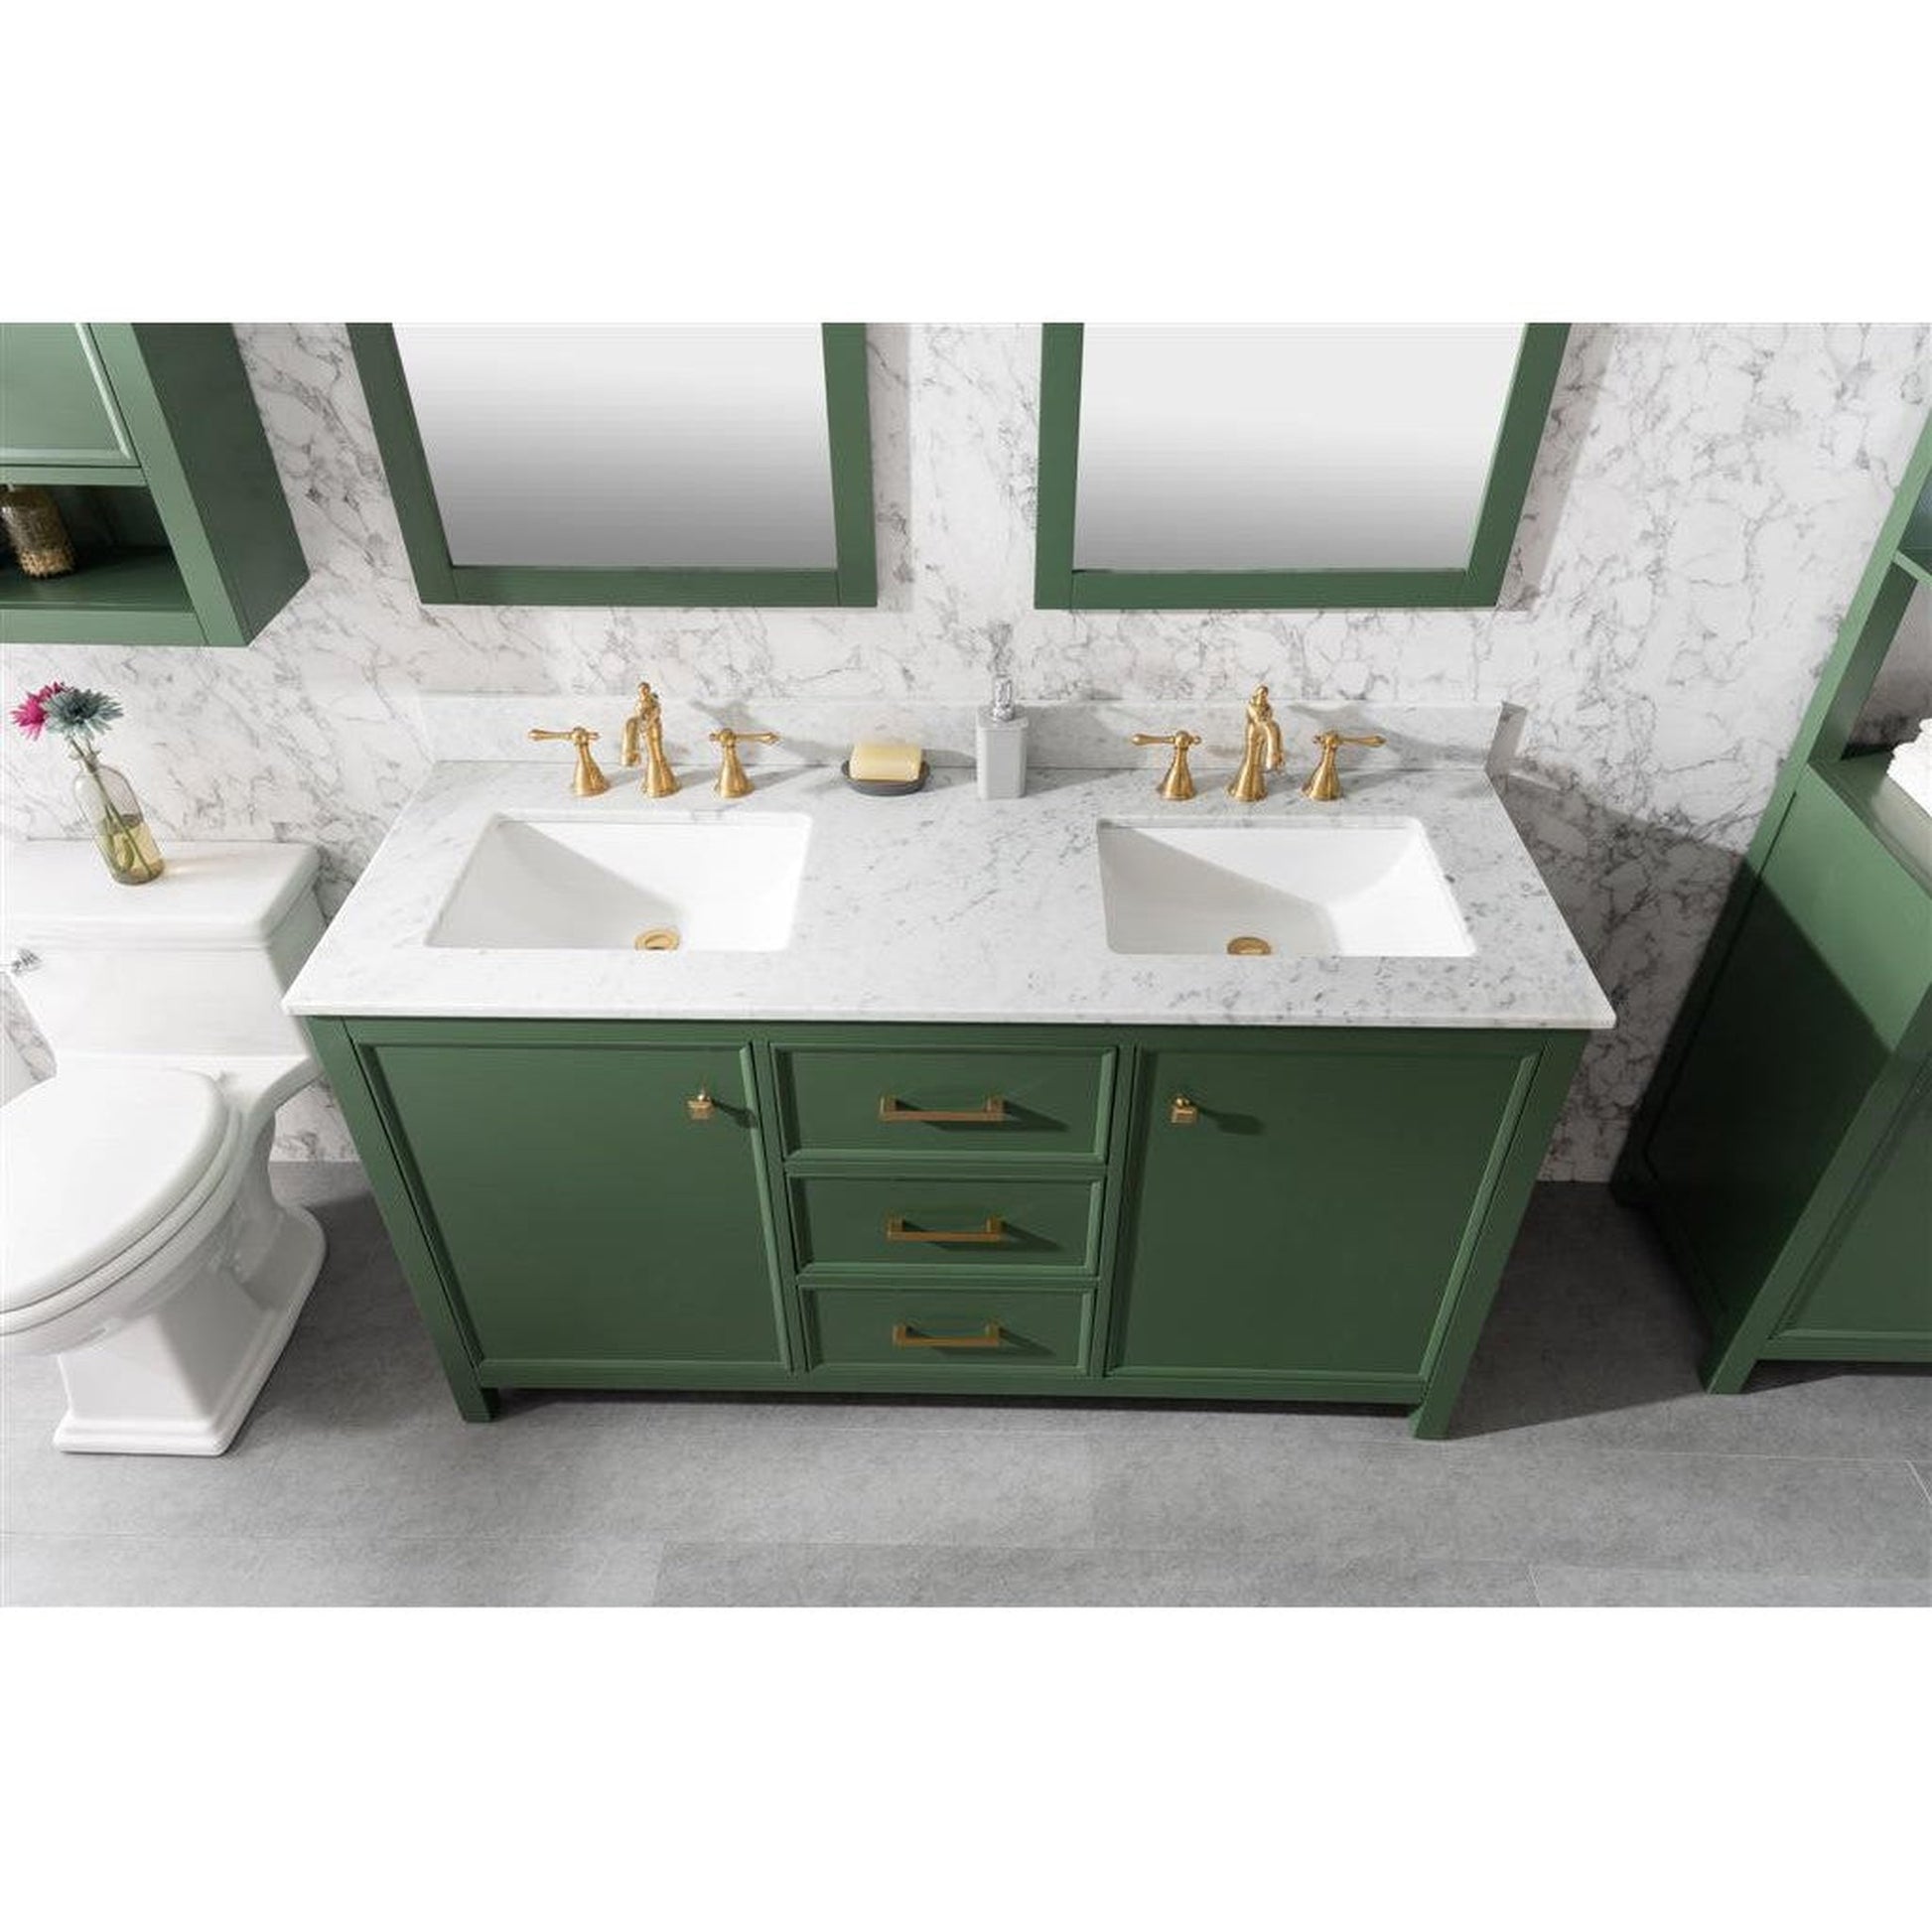 Legion Furniture WLF2160D 60" Vogue Green Freestanding Vanity With White Carrara Marble Top and Double White Ceramic Sink